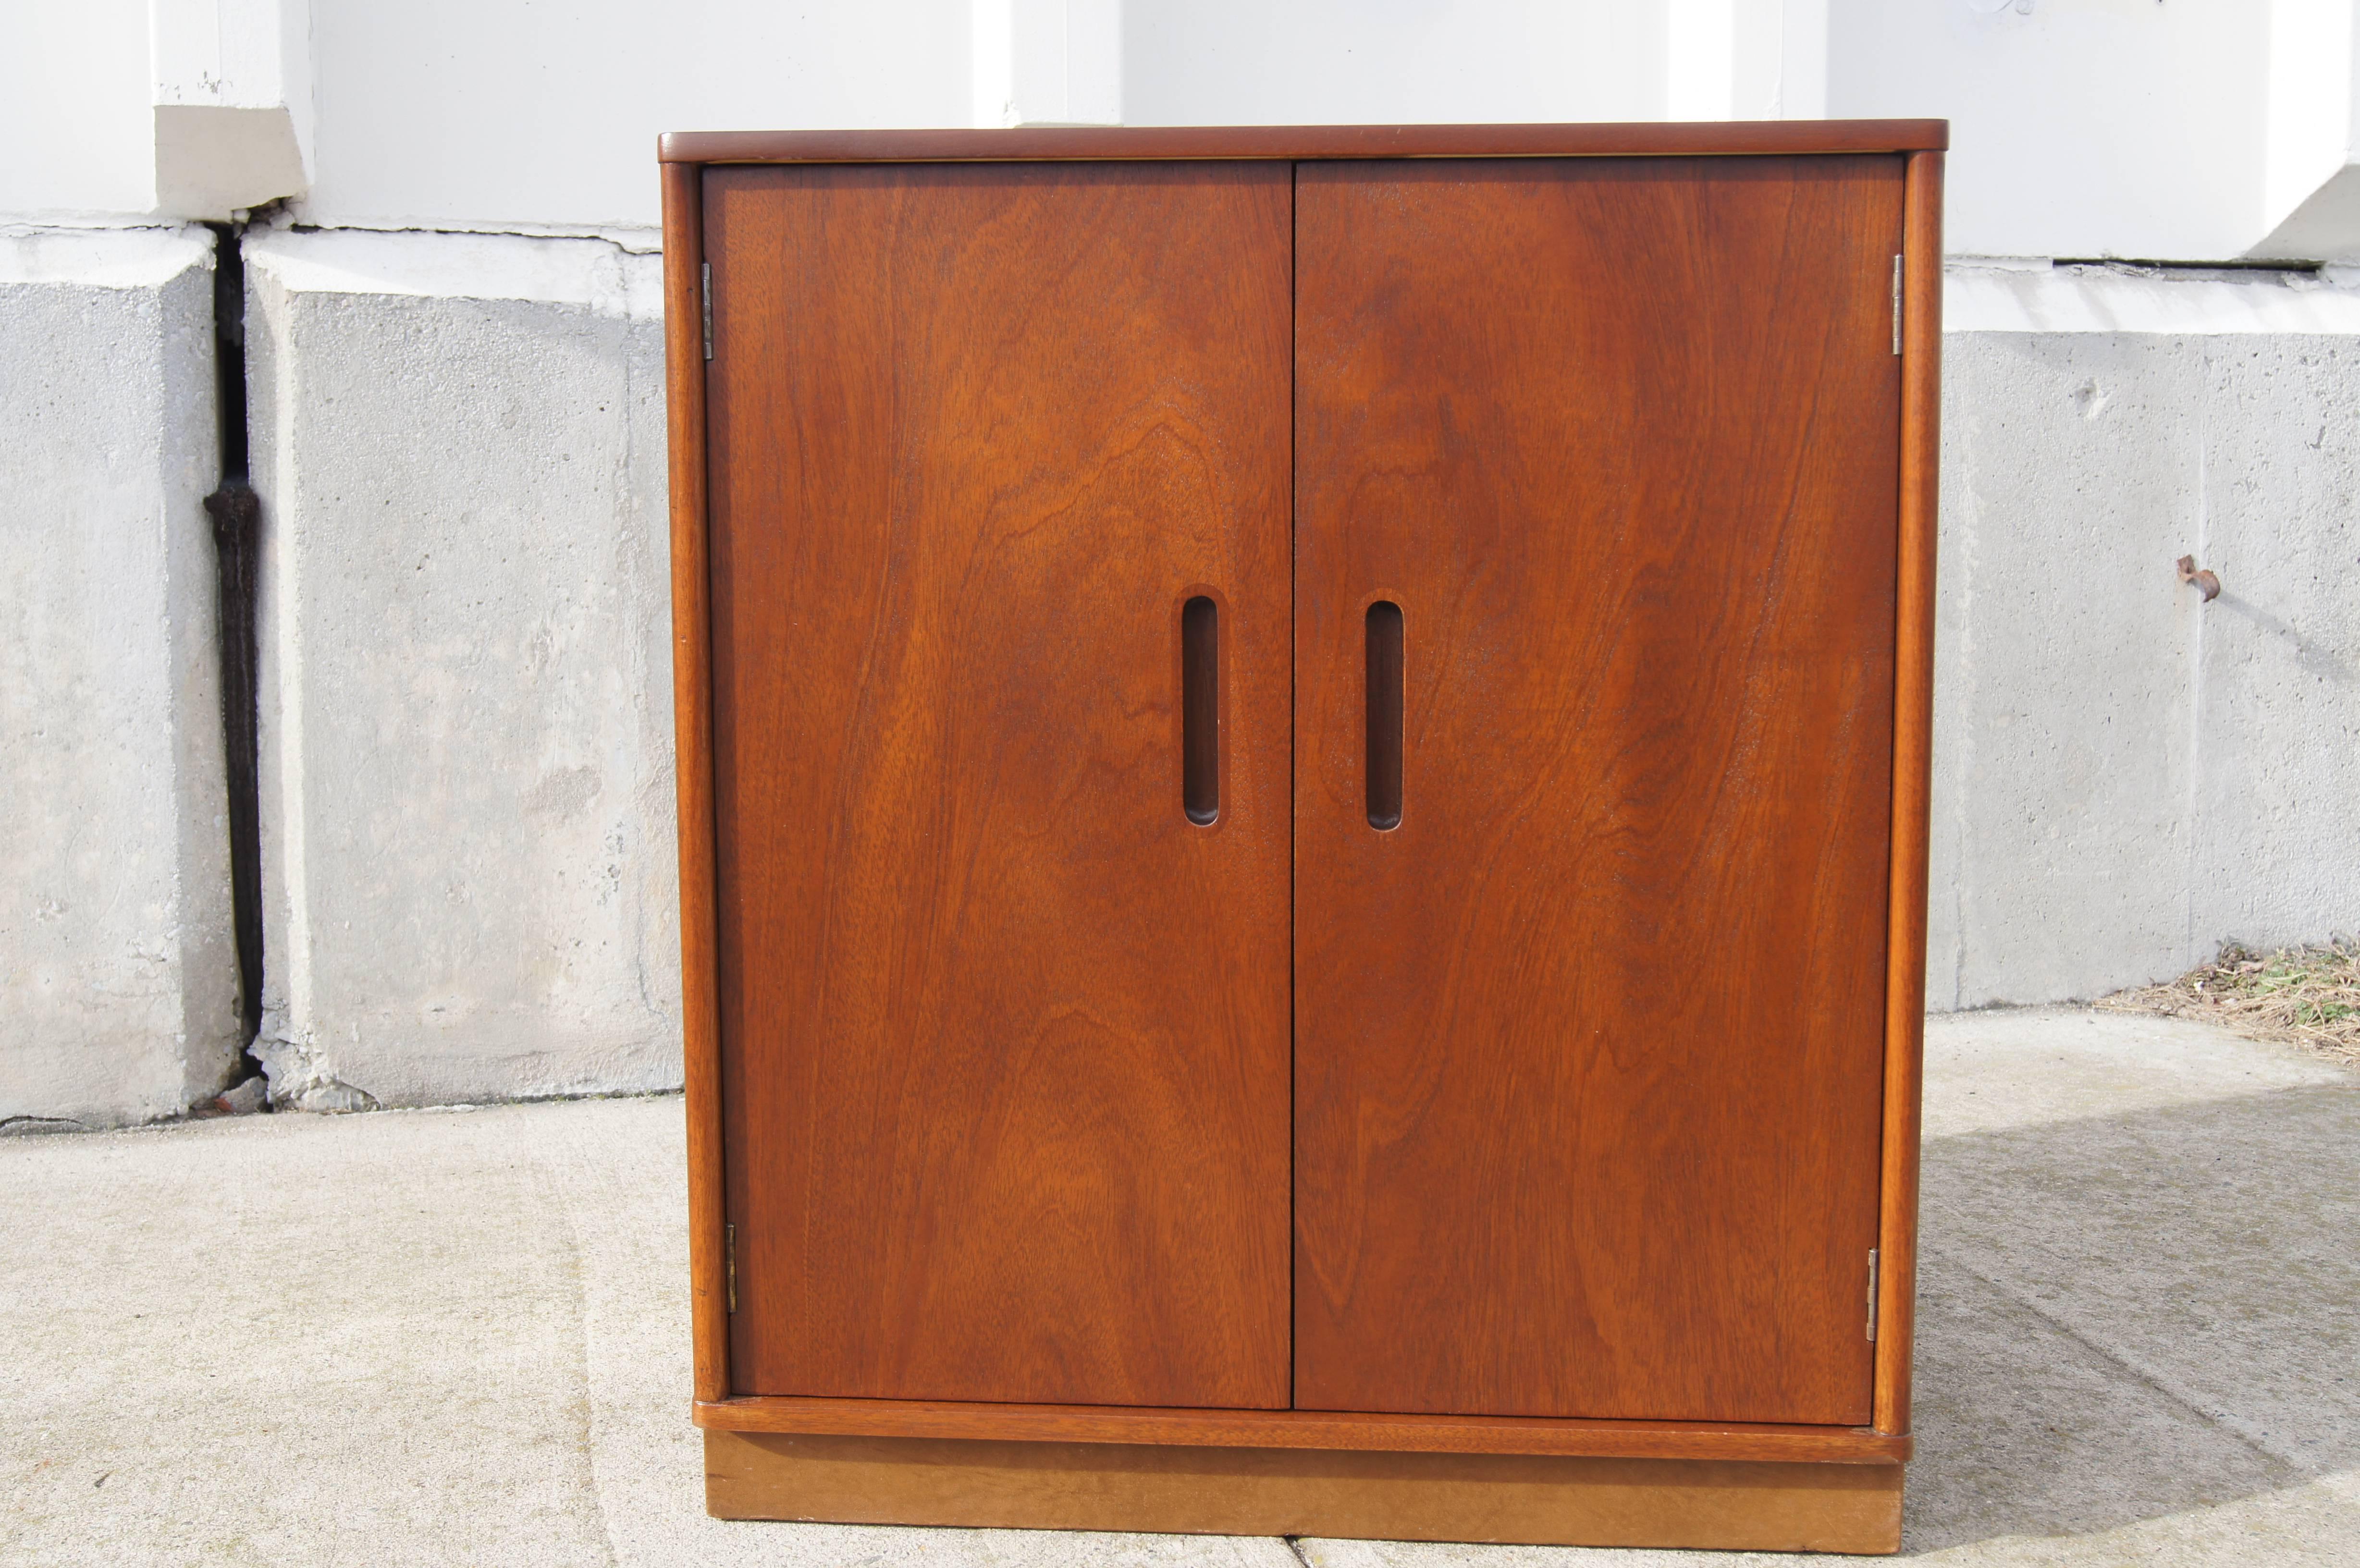 Designed by Edward Wormley for Dunbar, this trim mid-century cabinet in walnut-stained mahogany features recessed door pulls and a matching leather-wrapped base. Inside are two adjustable shelves.